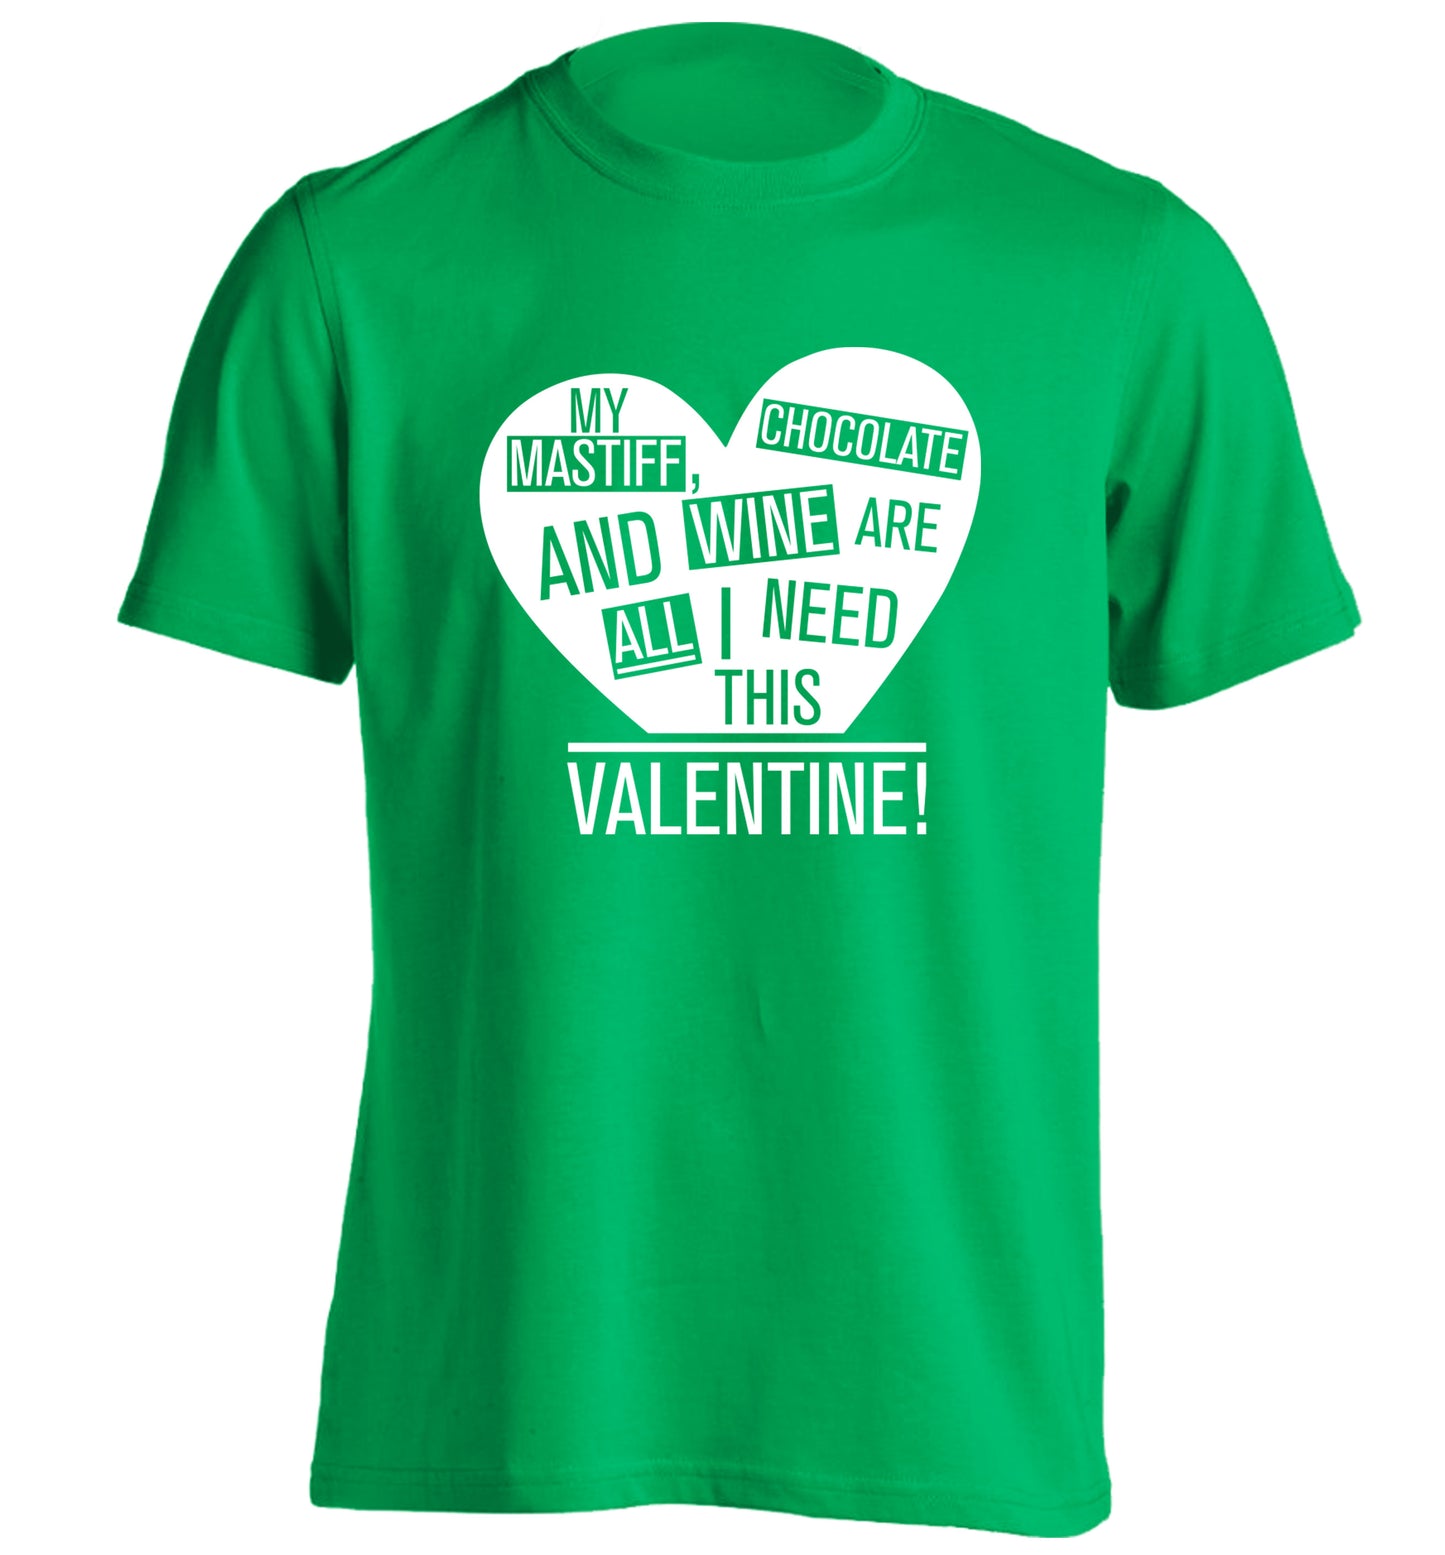 My mastiff, chocolate and wine are all I need this valentine! adults unisex green Tshirt 2XL